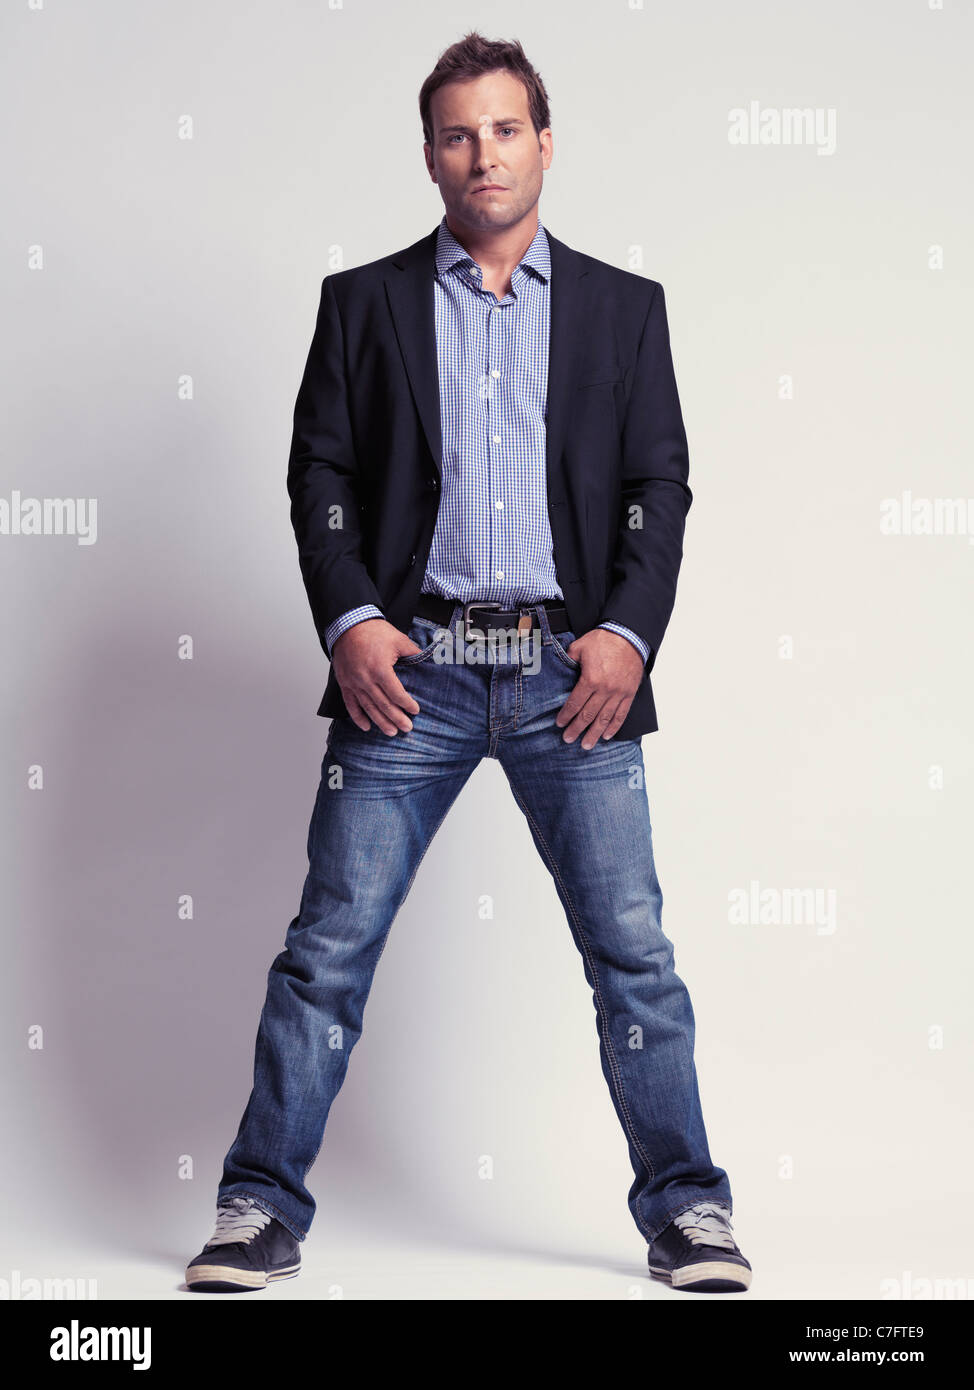 Fashionably dressed man in his thirties wearing jeans and a stylish jacket  Stock Photo - Alamy